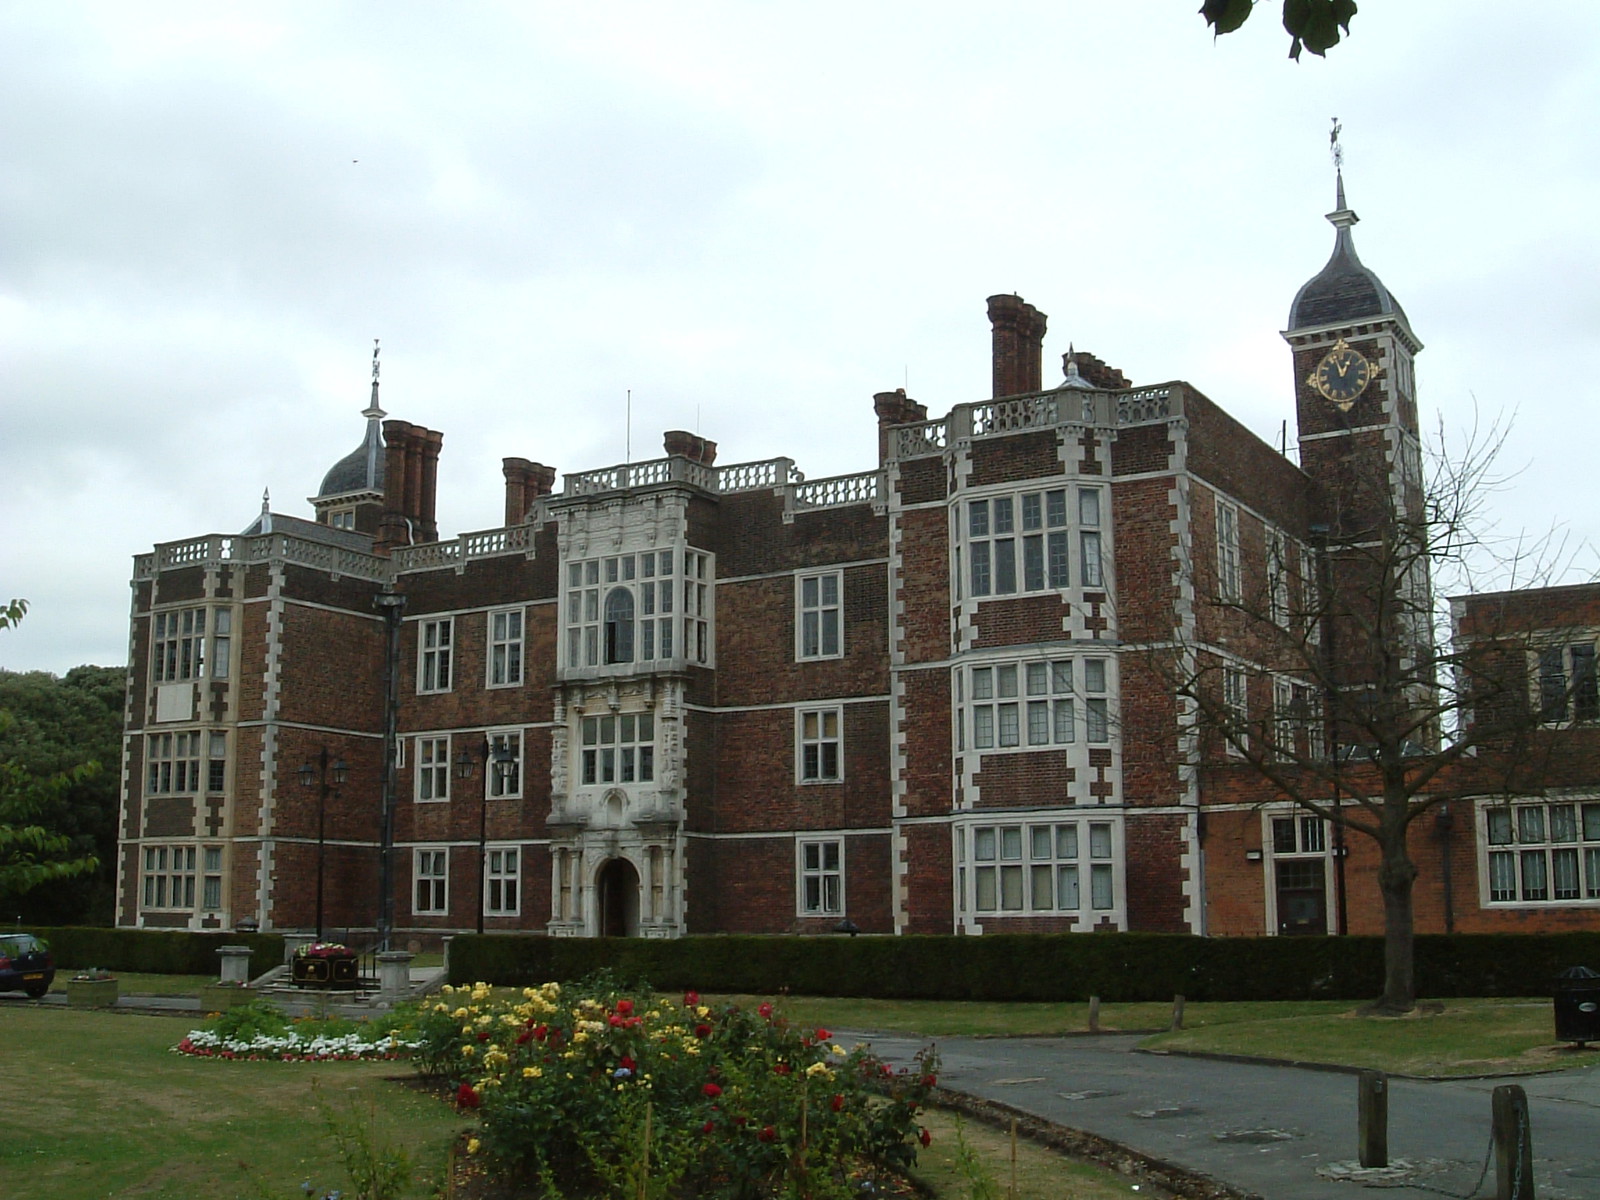 The front of Charlton House